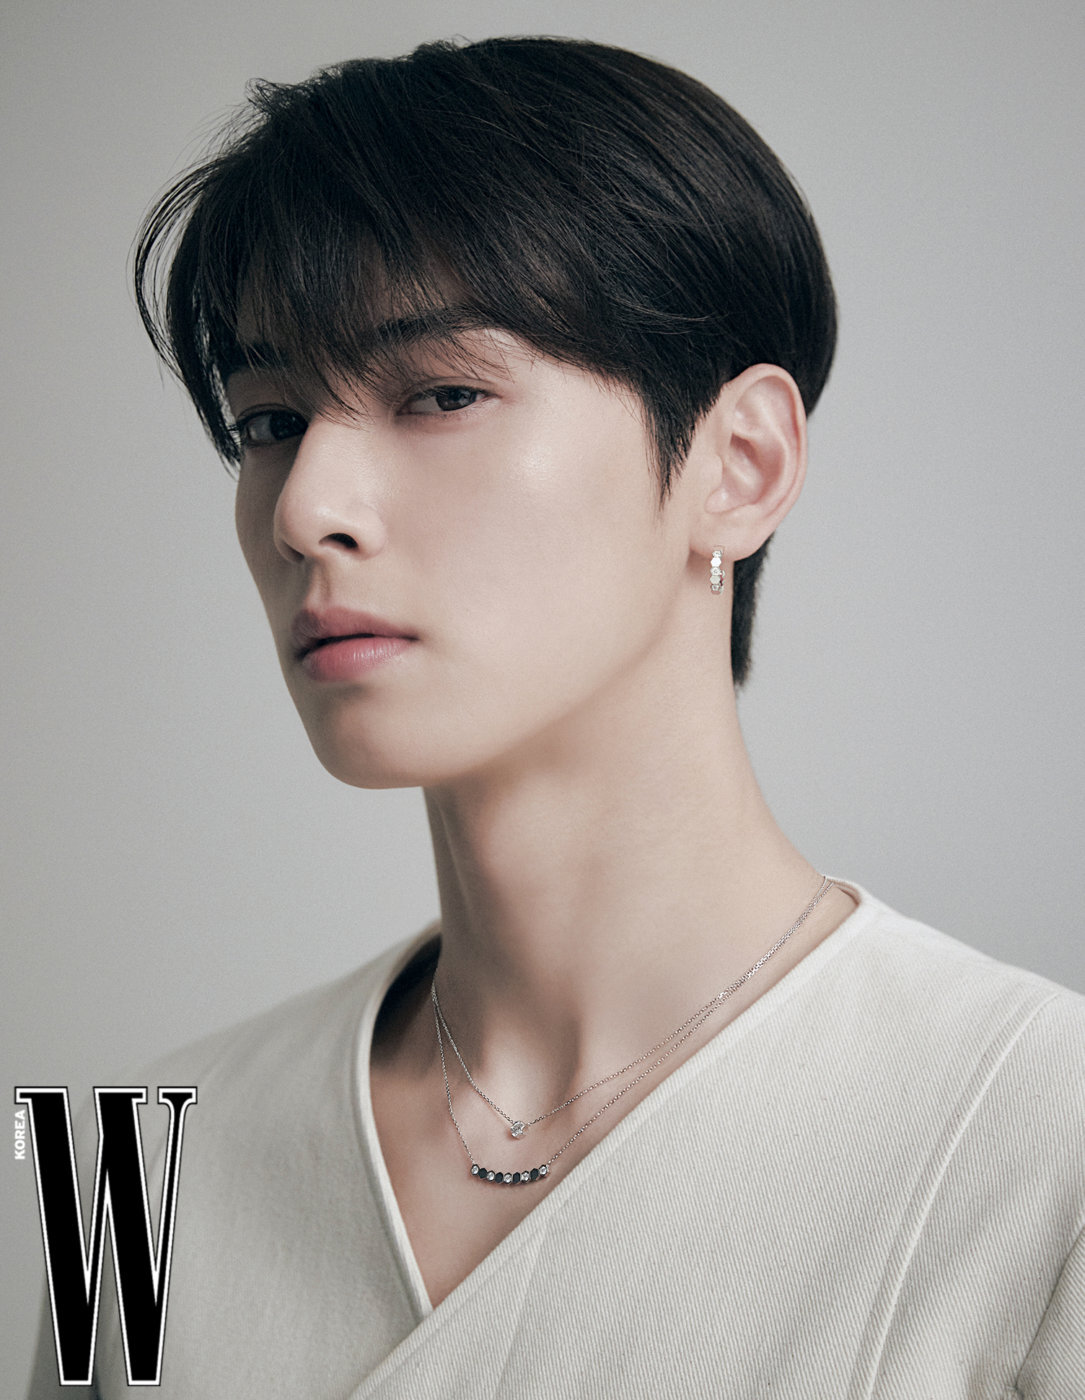 ASTRO's Cha Eunwoo Is Going Viral For His Celebrity Interactions At A  Recent Chaumet Event - Koreaboo